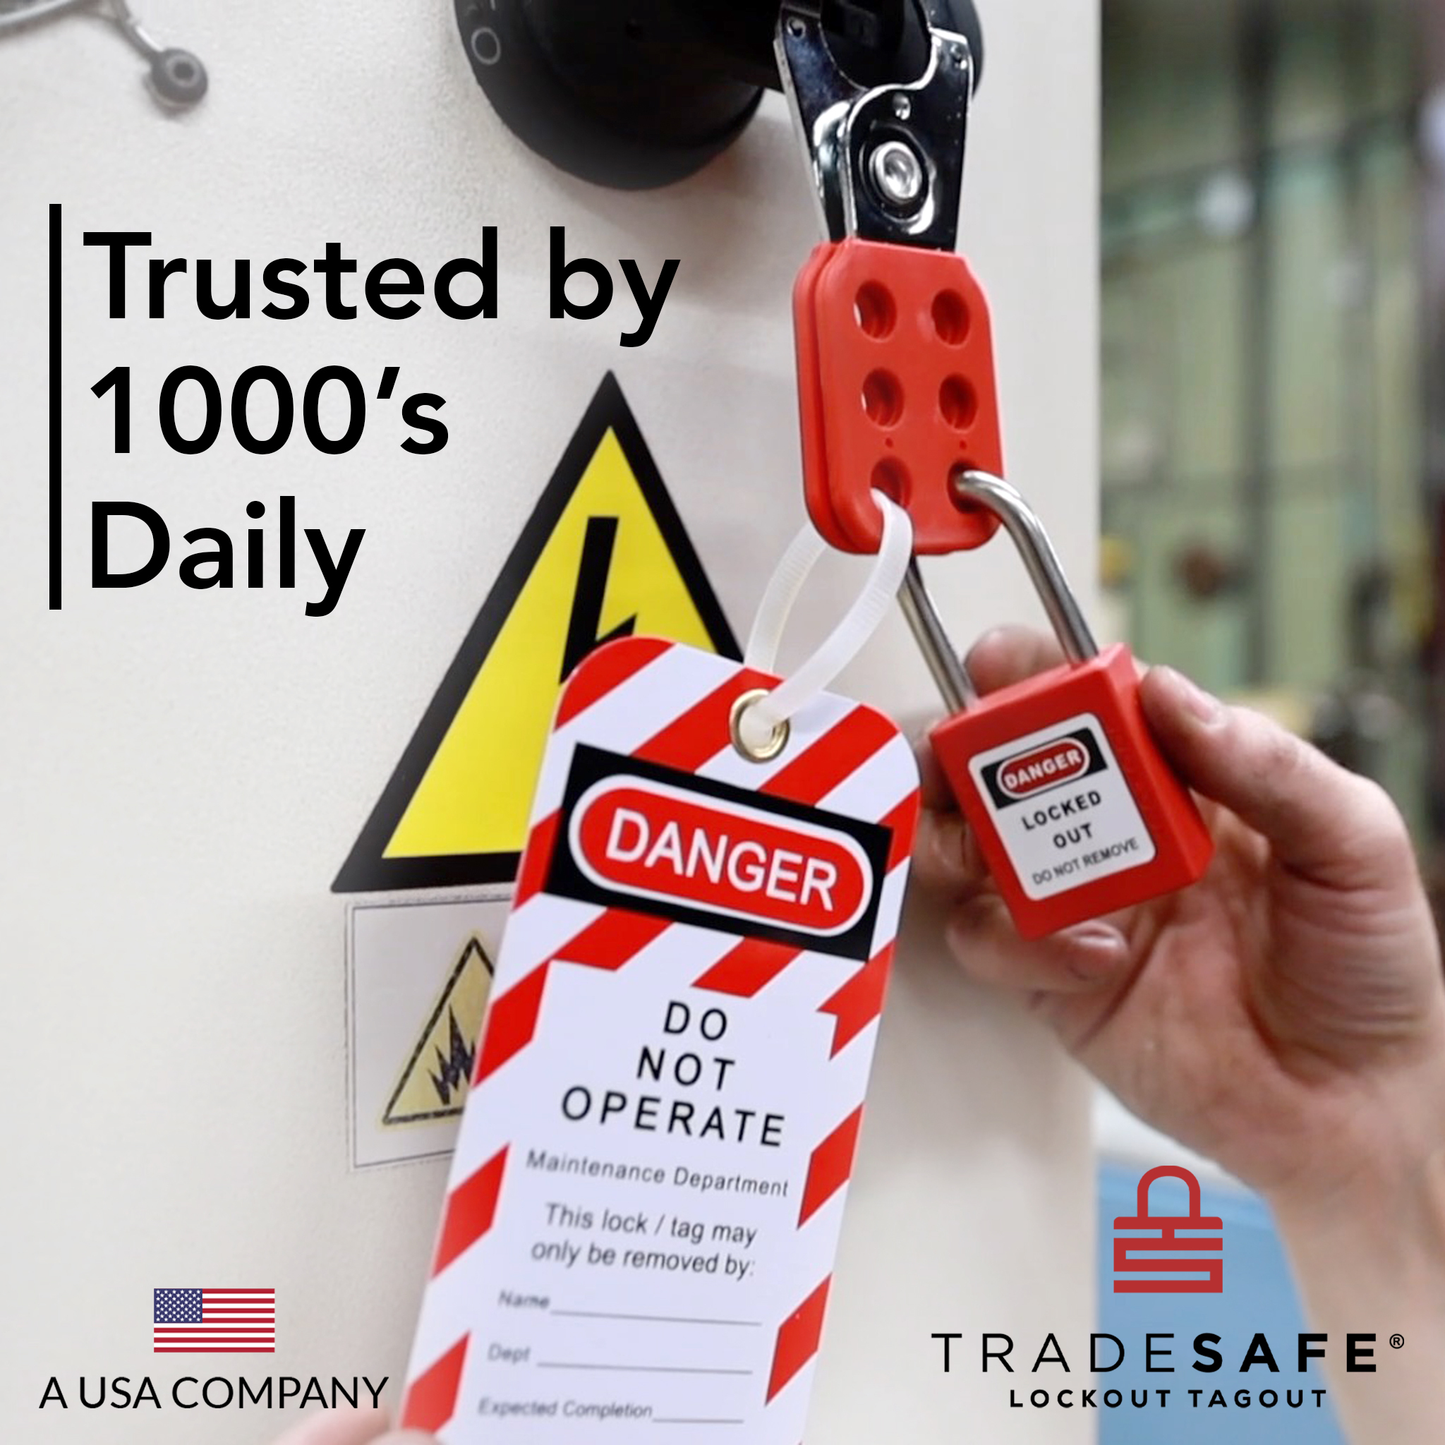 tradesafe loto branding image trusted by 1000s daily